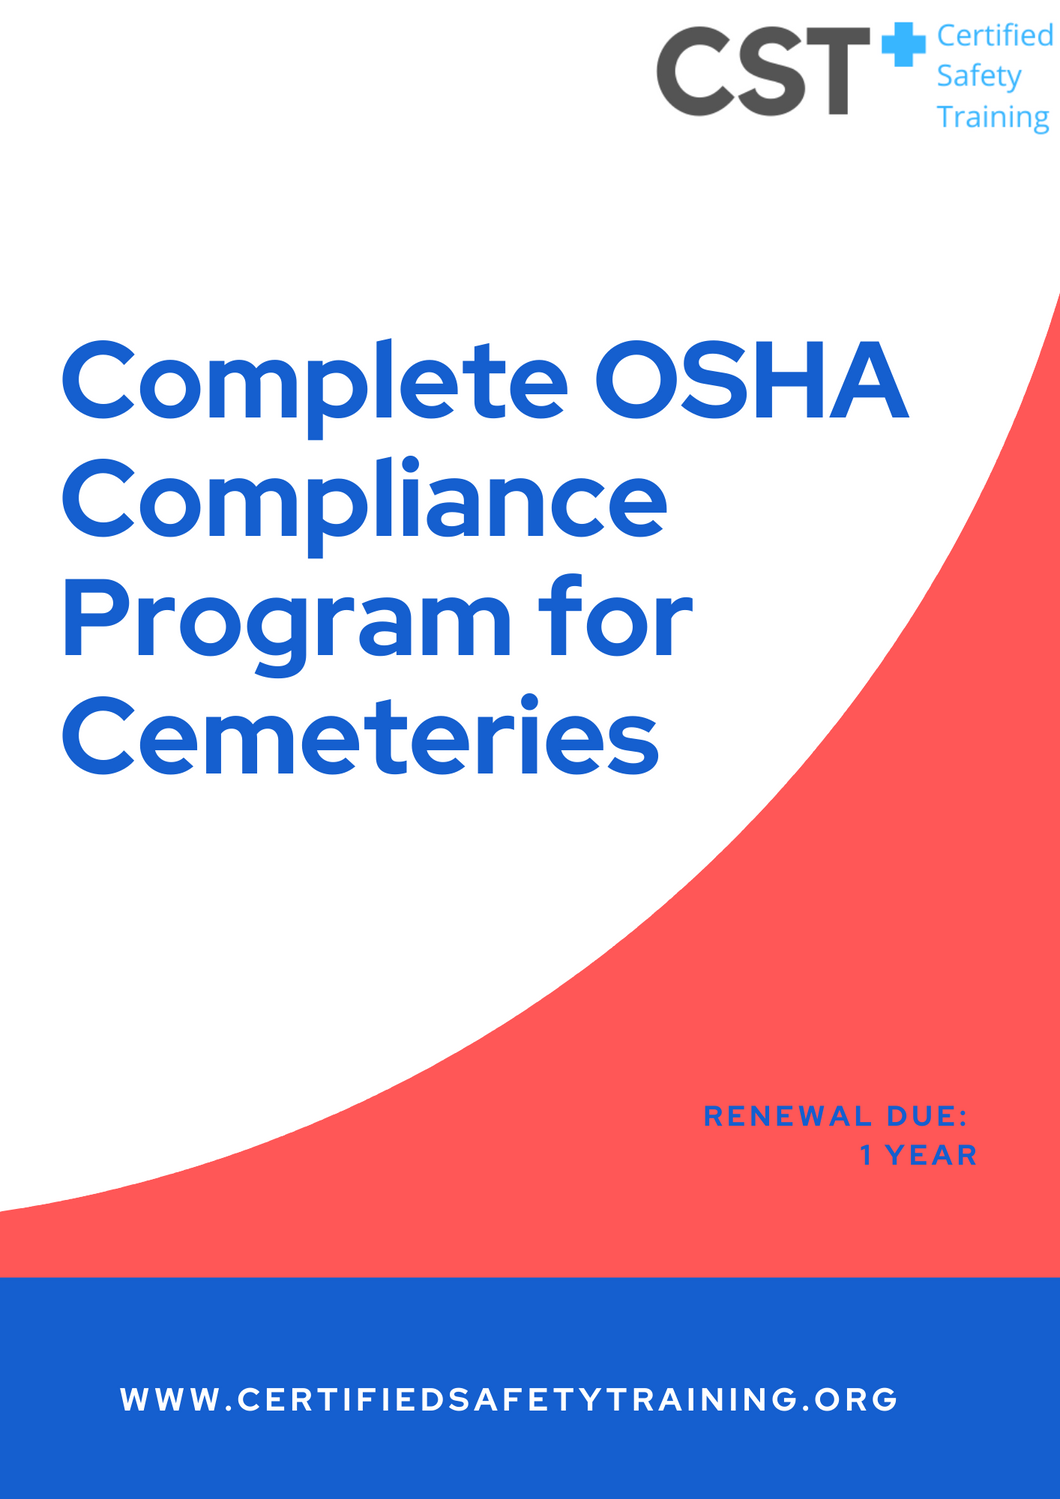 Complete OSHA Compliance for Family-Owned Cemeteries